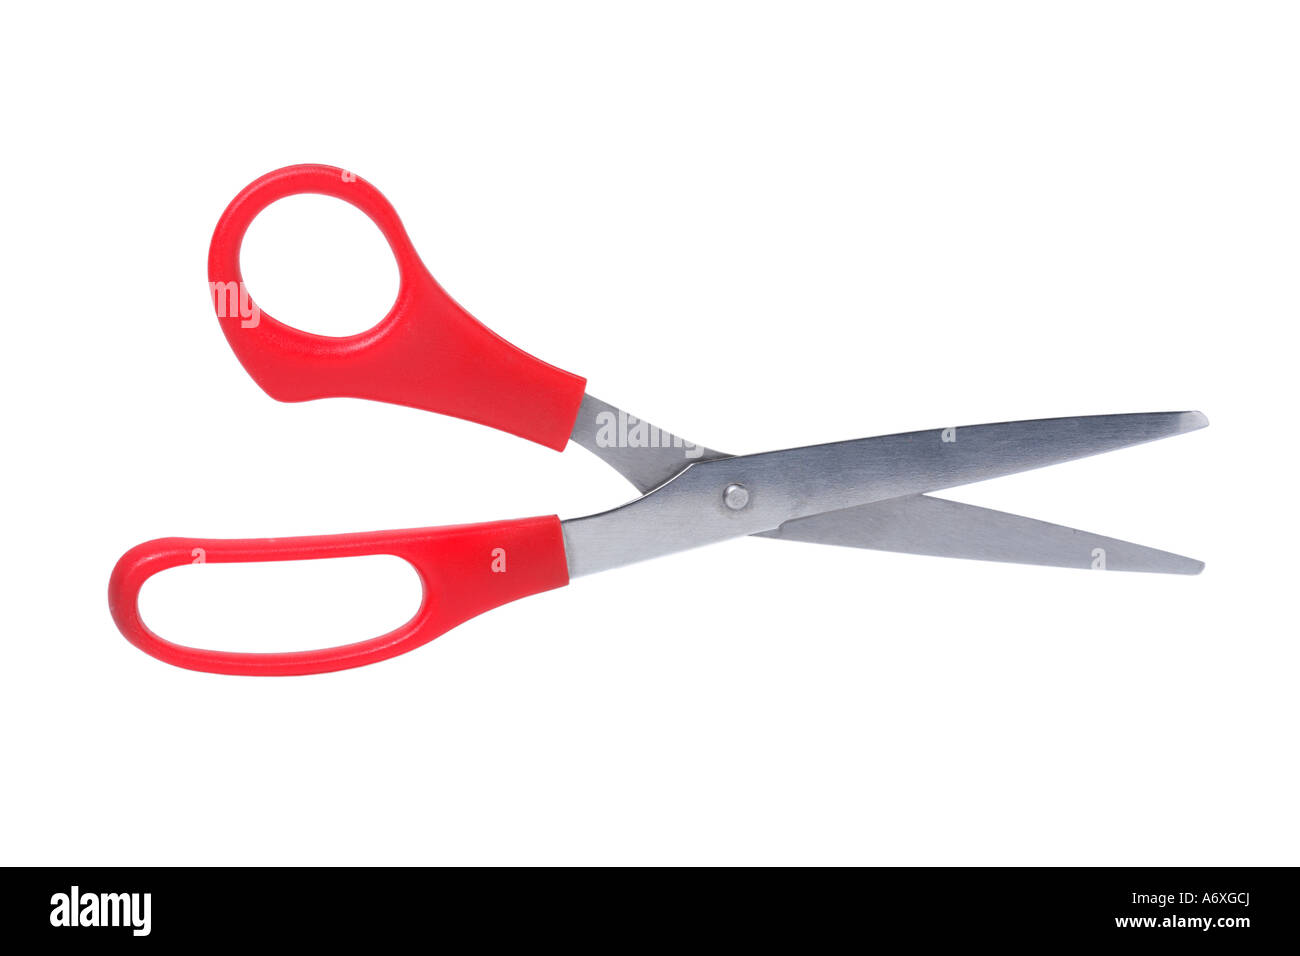 Scissors cut out on white background Stock Photo